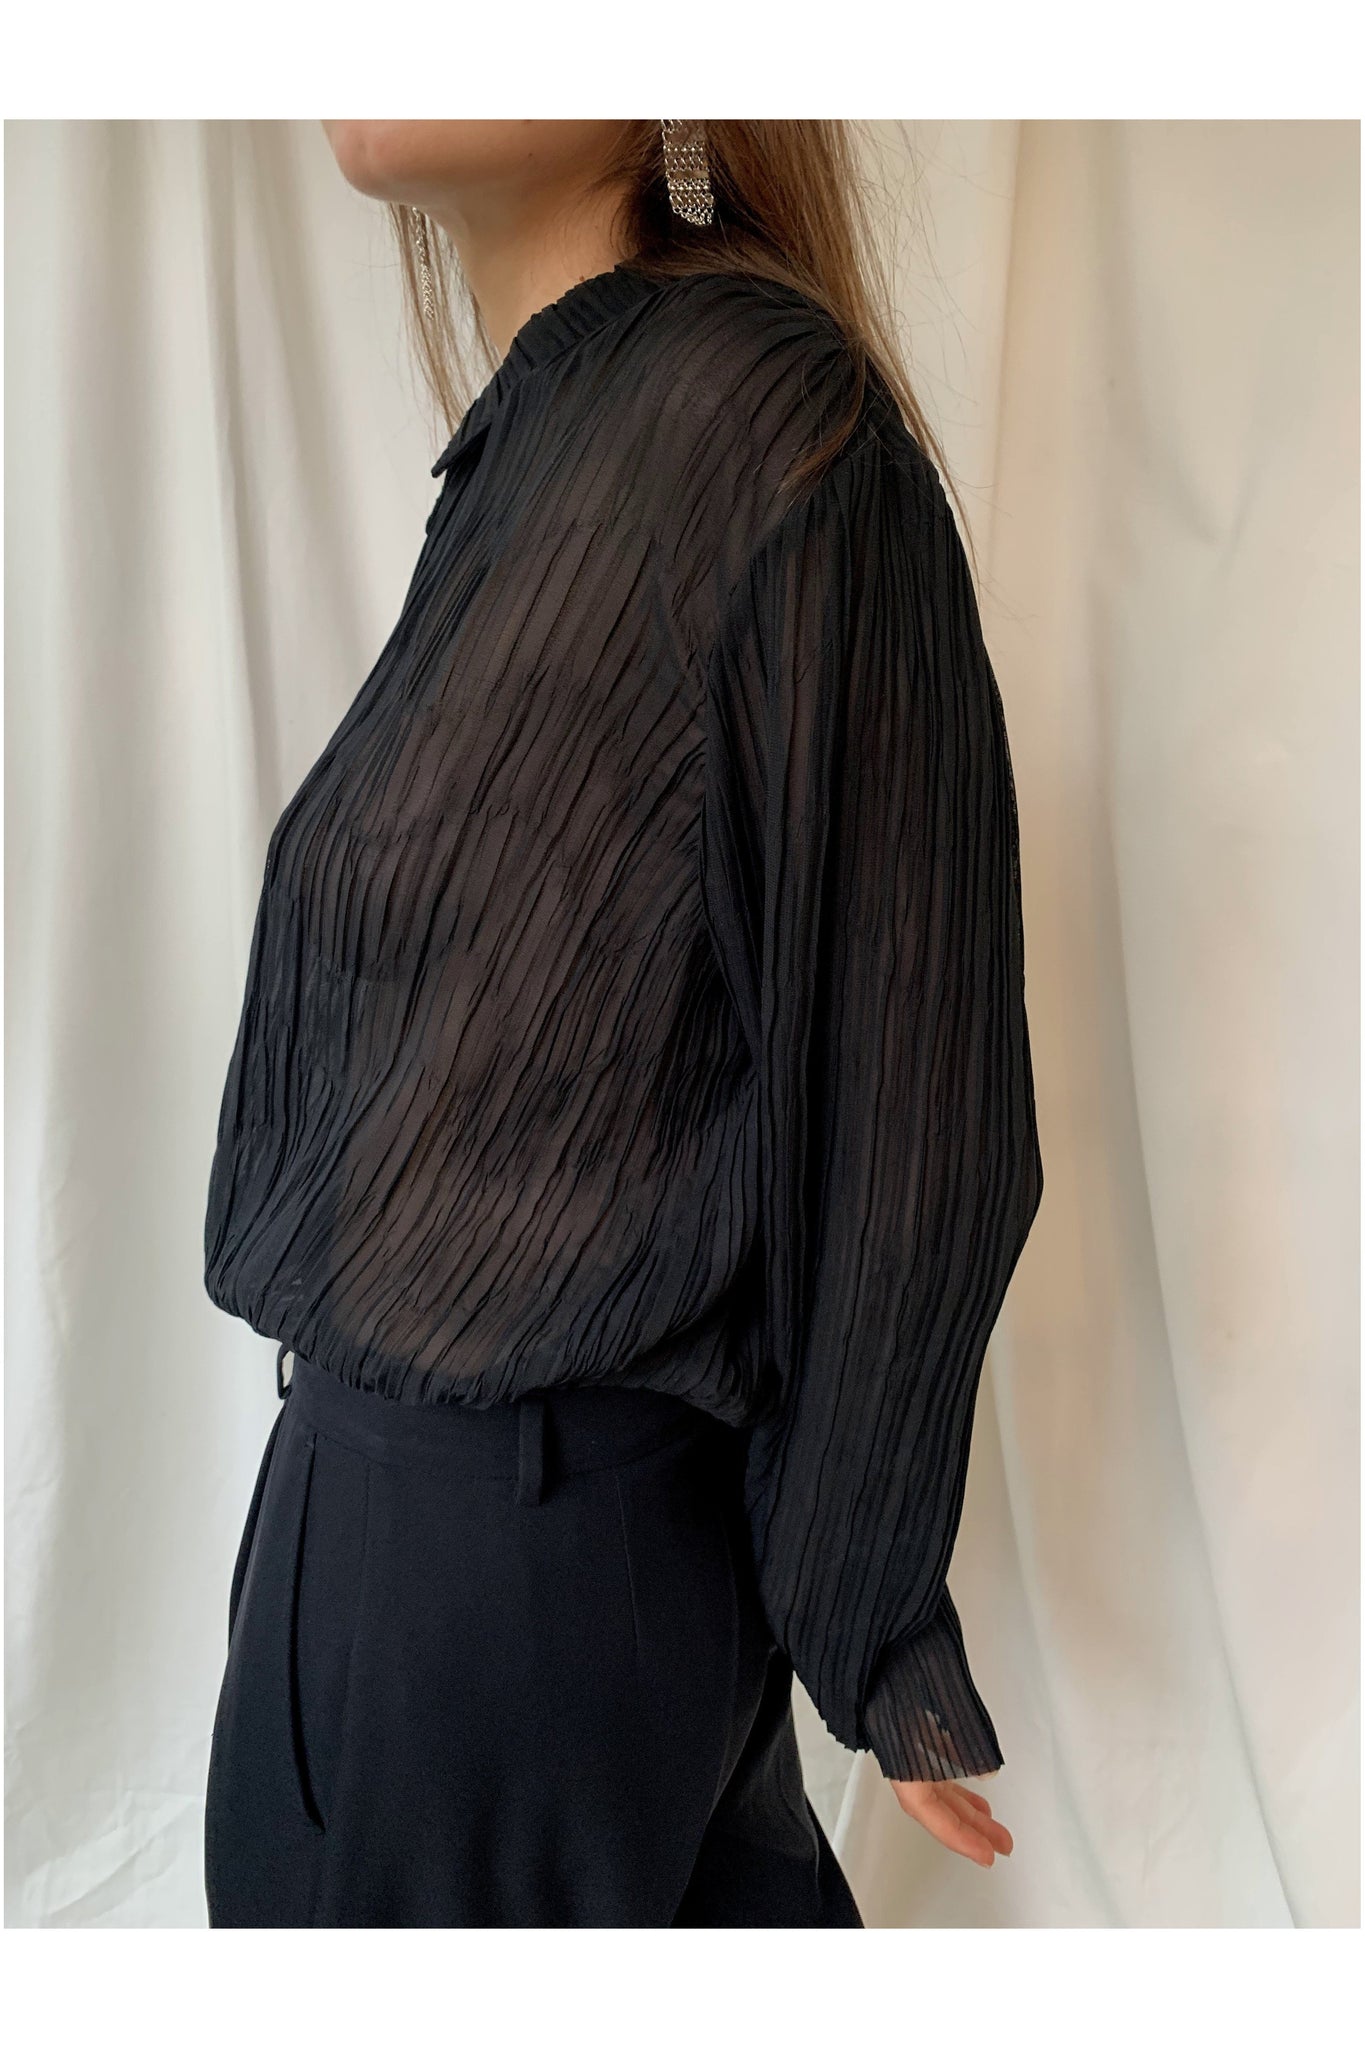 HOPE BLACK PLEATET SHIRT WITH EXTRA LONG SLEEVES - BEYOND STUDIOS